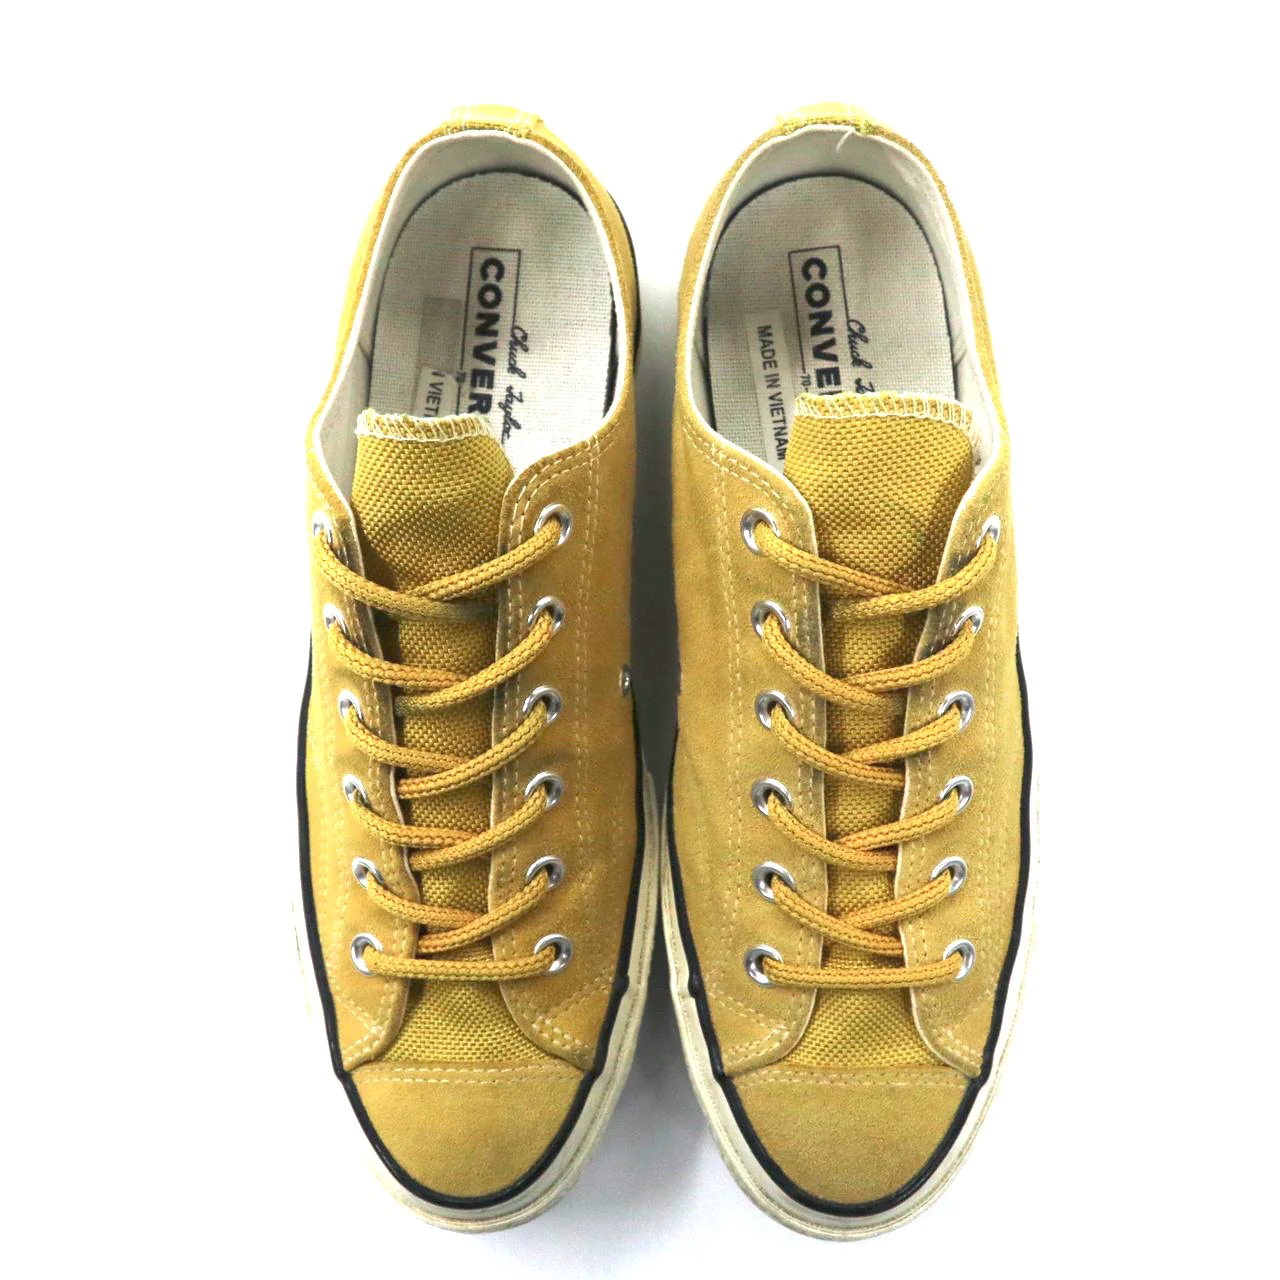 Converse Sneakers US8.5 Yellow CT70 Suede Chuck Taylor All-Star 70